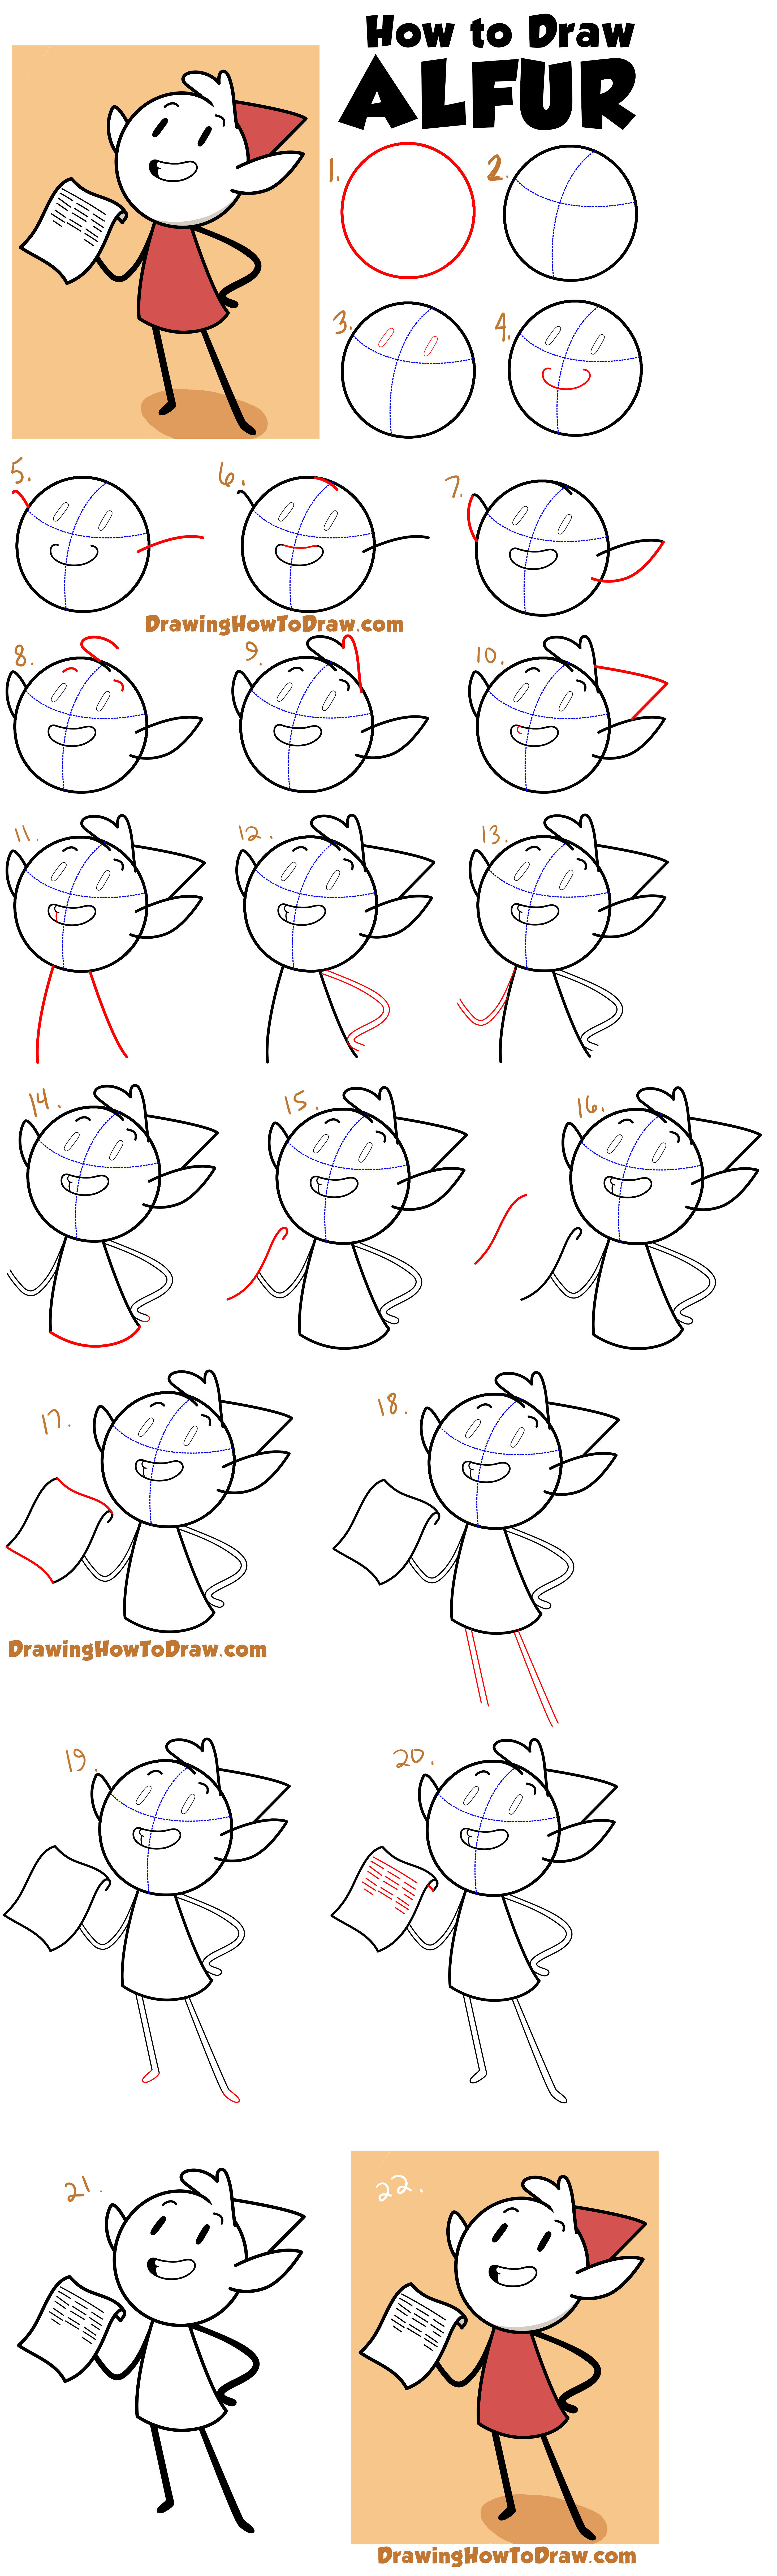 Learn How to Draw Alfur the Elf from Hilda Simple Steps Drawing Lesson for Beginners + Kids